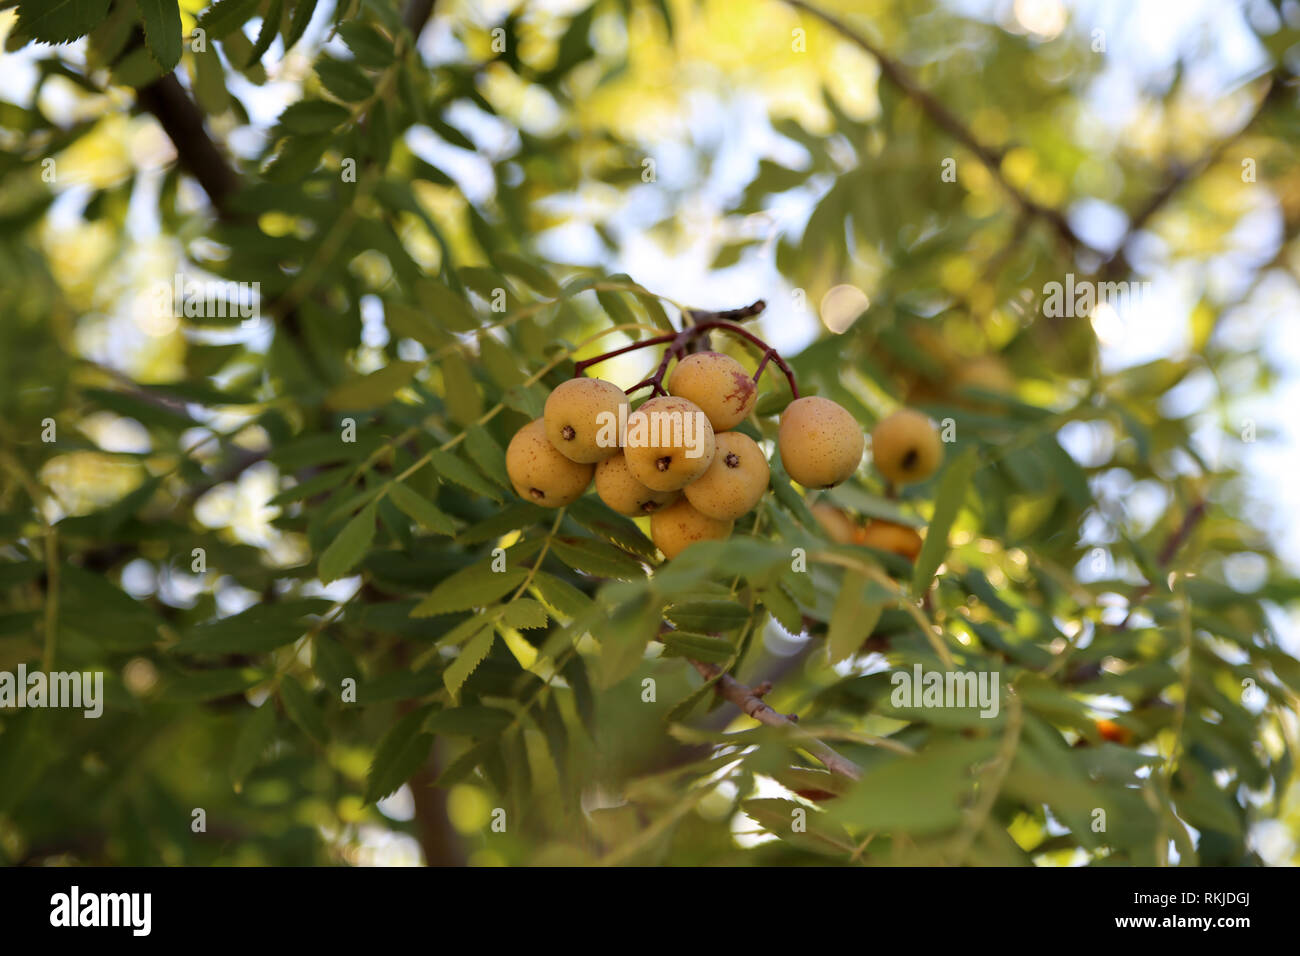 The fruits of Sorbus domestica, the so called Service-tree, from the family Rosaceae Stock Photo